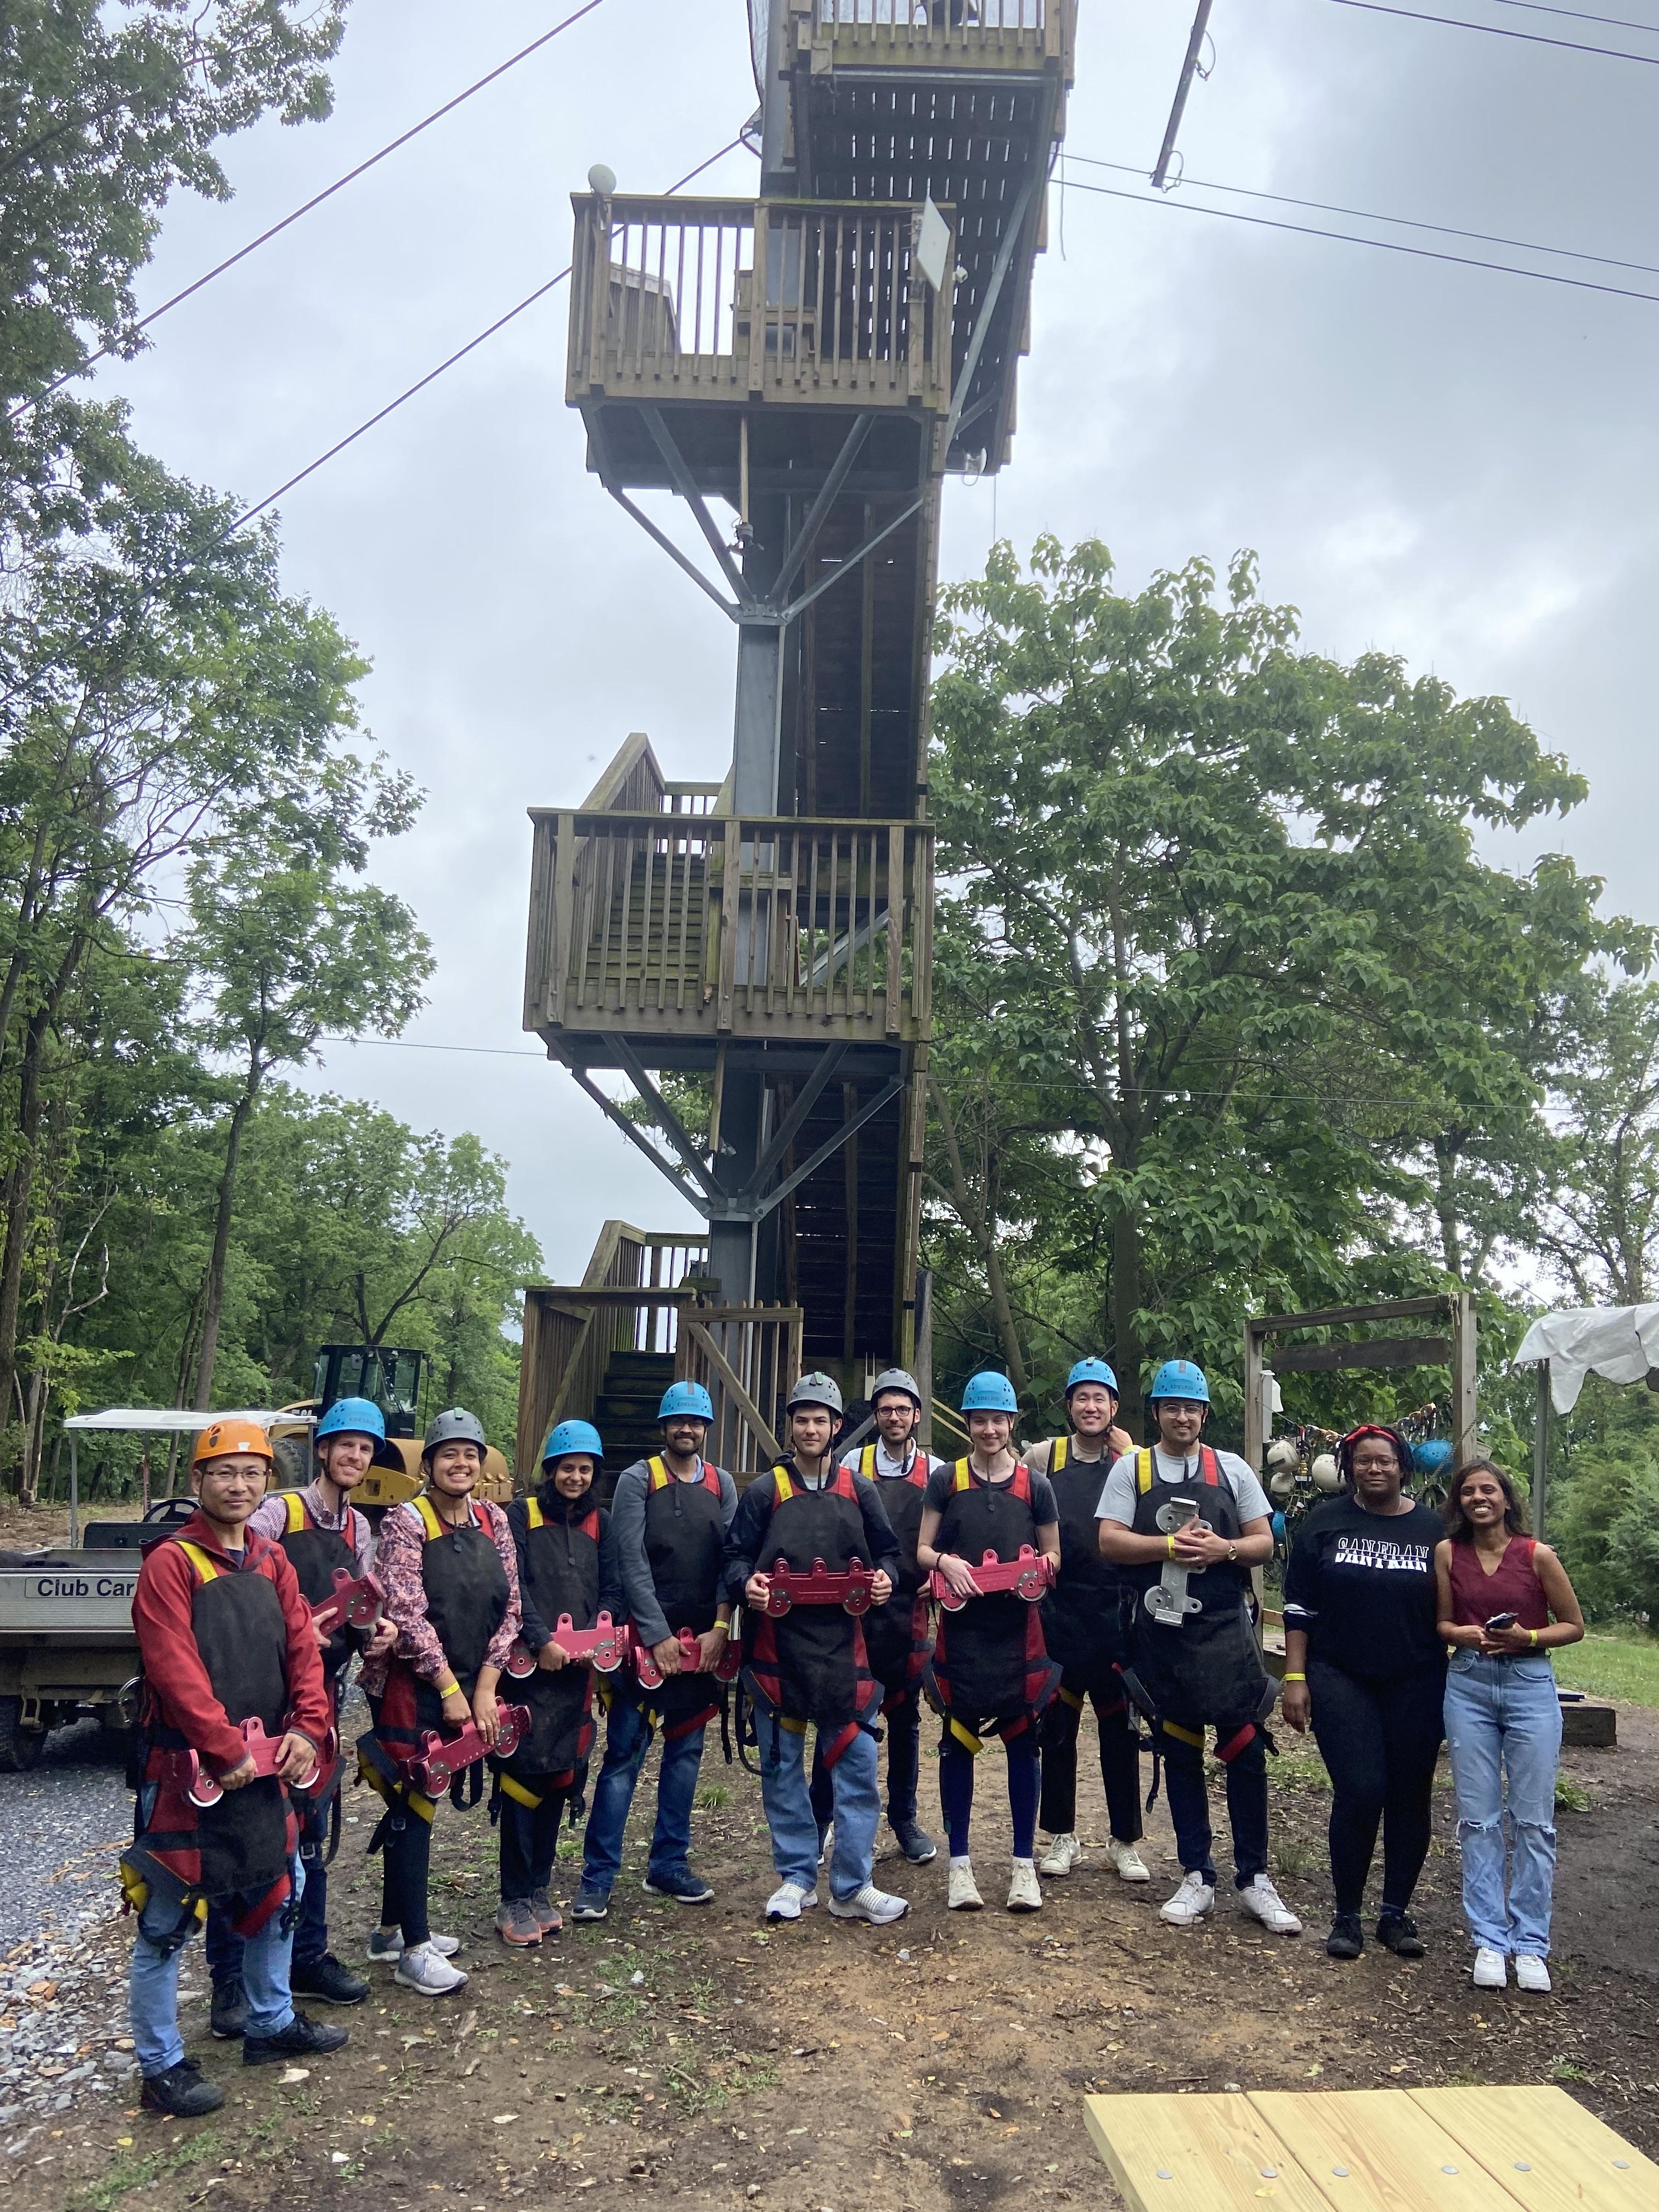 Ziplining group picture